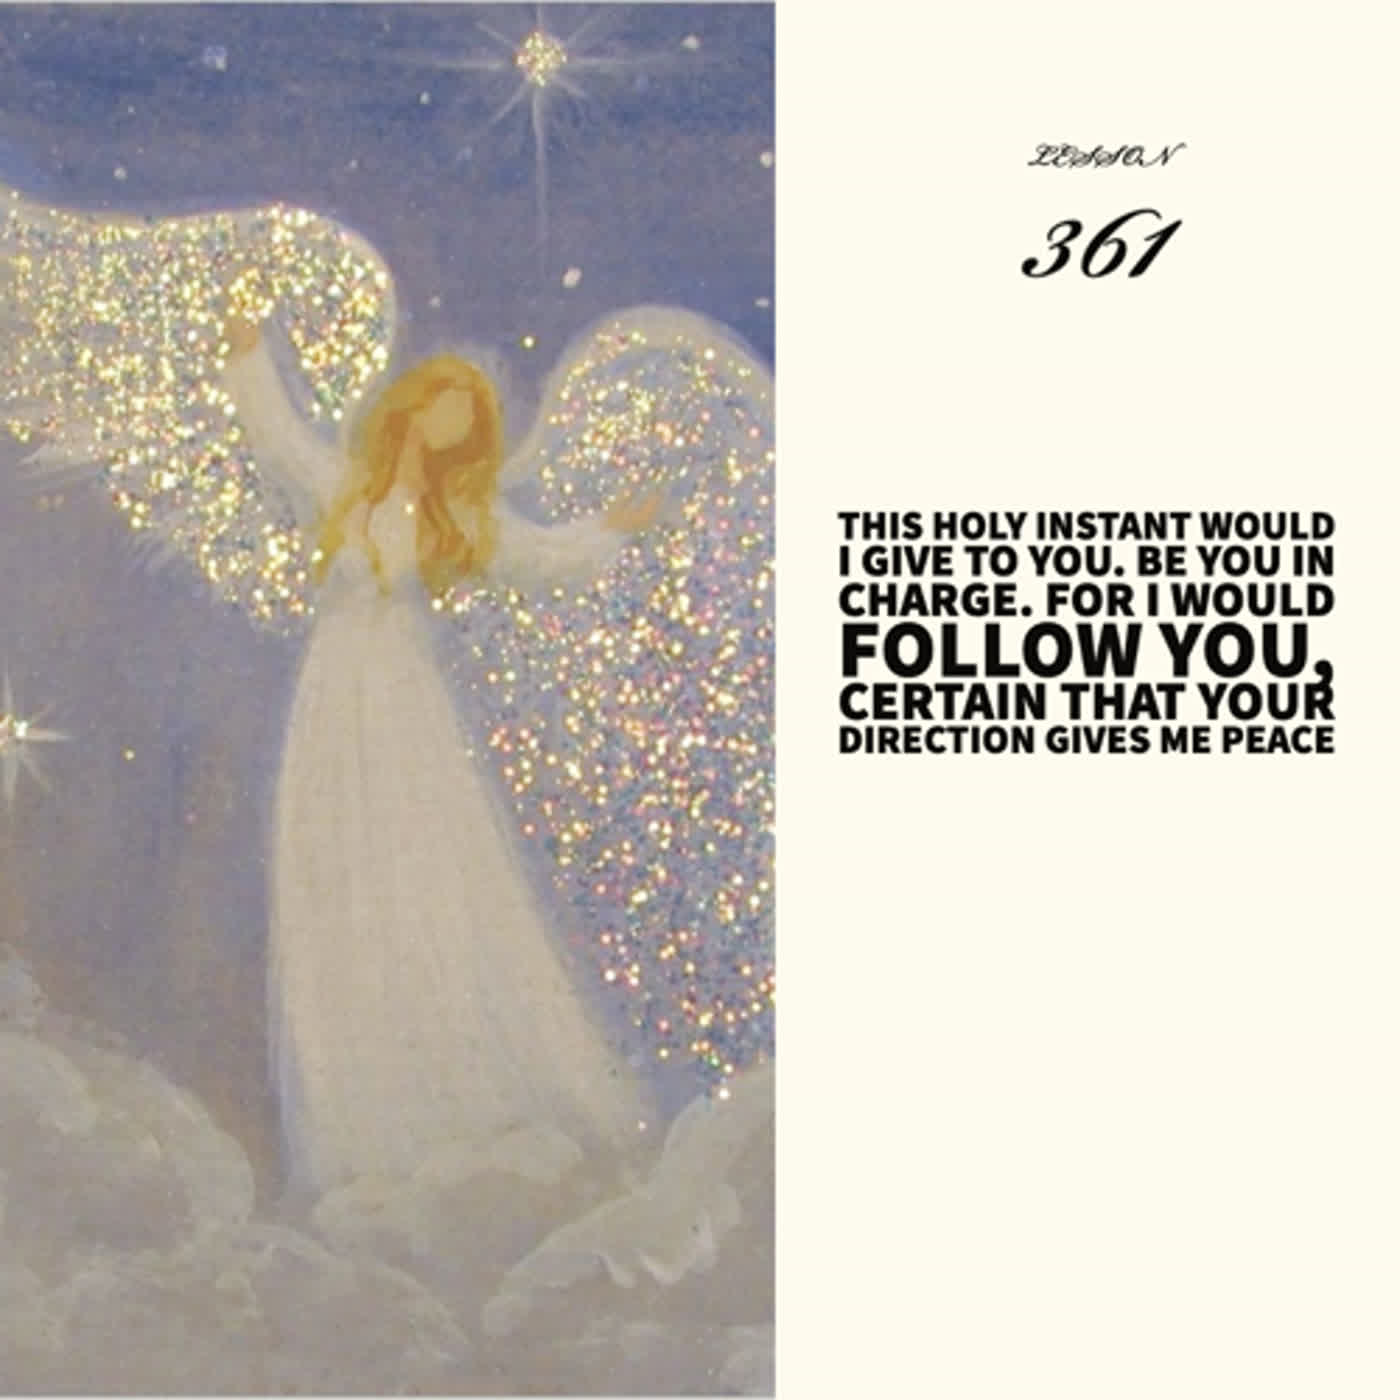 Lessons 361   This holy instant would I give to You. Be You in charge. For I would follow You, certain that Your direction gives me peace